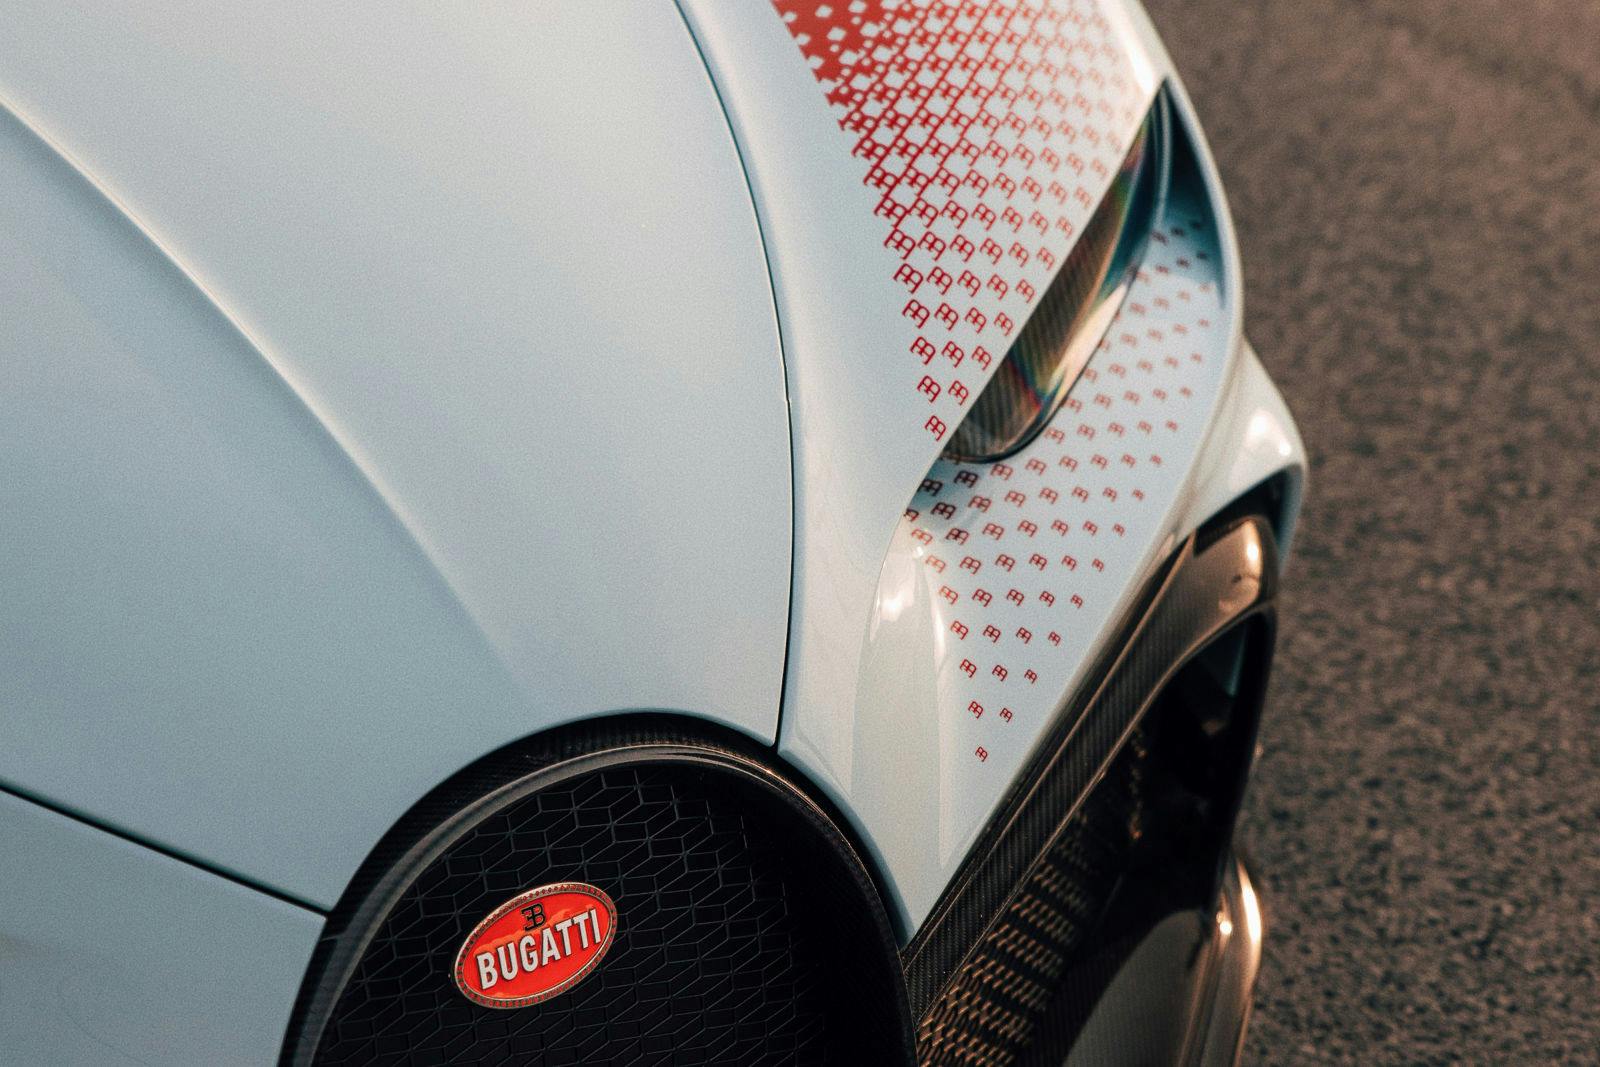 Custom elements of the CHIRON Pur Sport ‘Grand Prix’ were especially developed to pay homage to the legendary Grand Prix racing Bugattis of the 1920s and 30s.